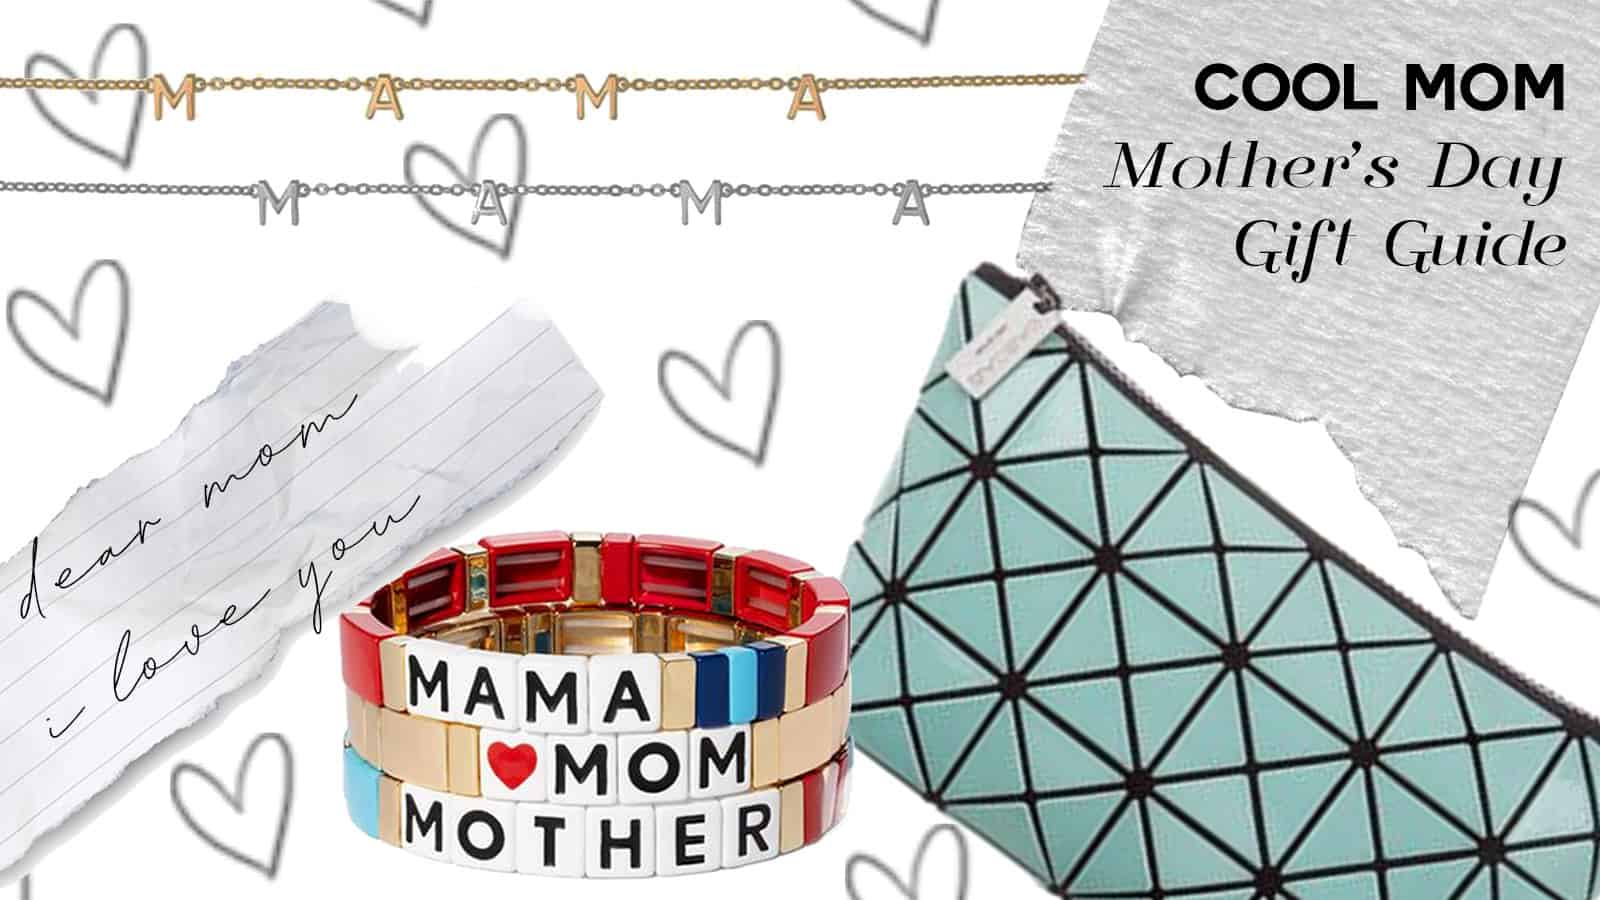 Weekly Wants: Cool Mom Mother’s Day Gifts